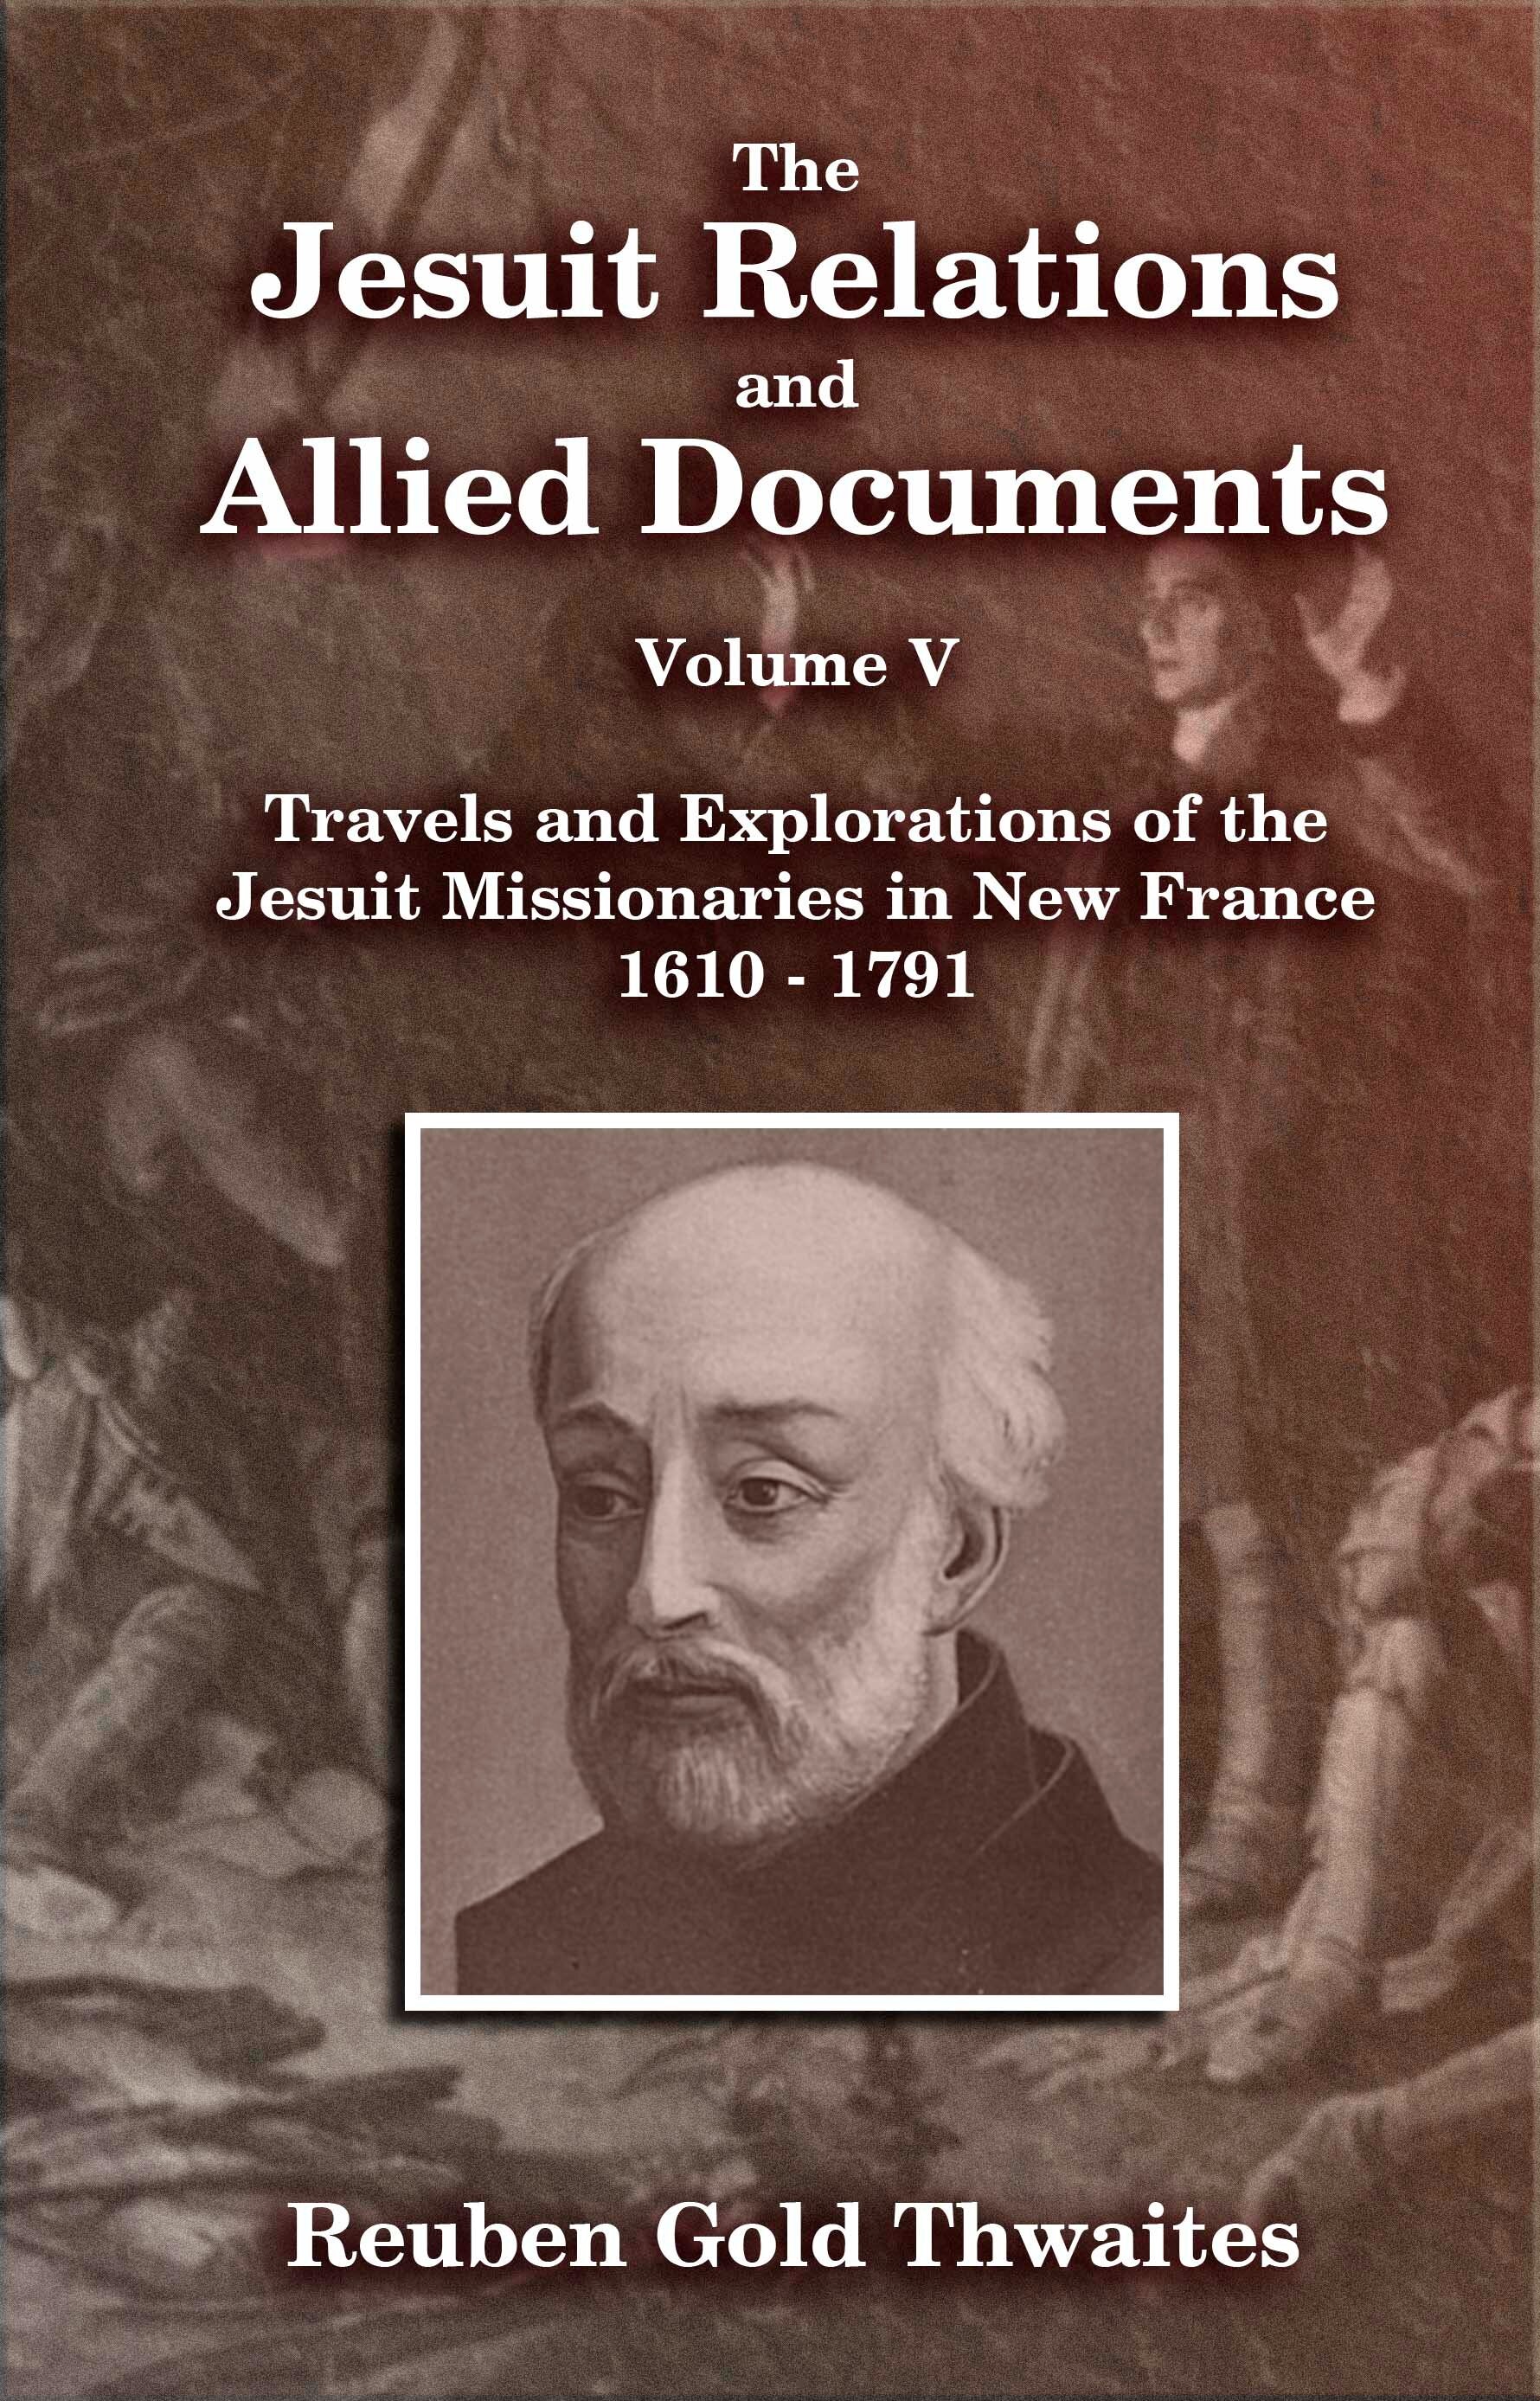 The Jesuit Relations and Allied Documents, Travels and Explorations of the Jesuit Missionaries in New France 1610 - 1791 Volume V